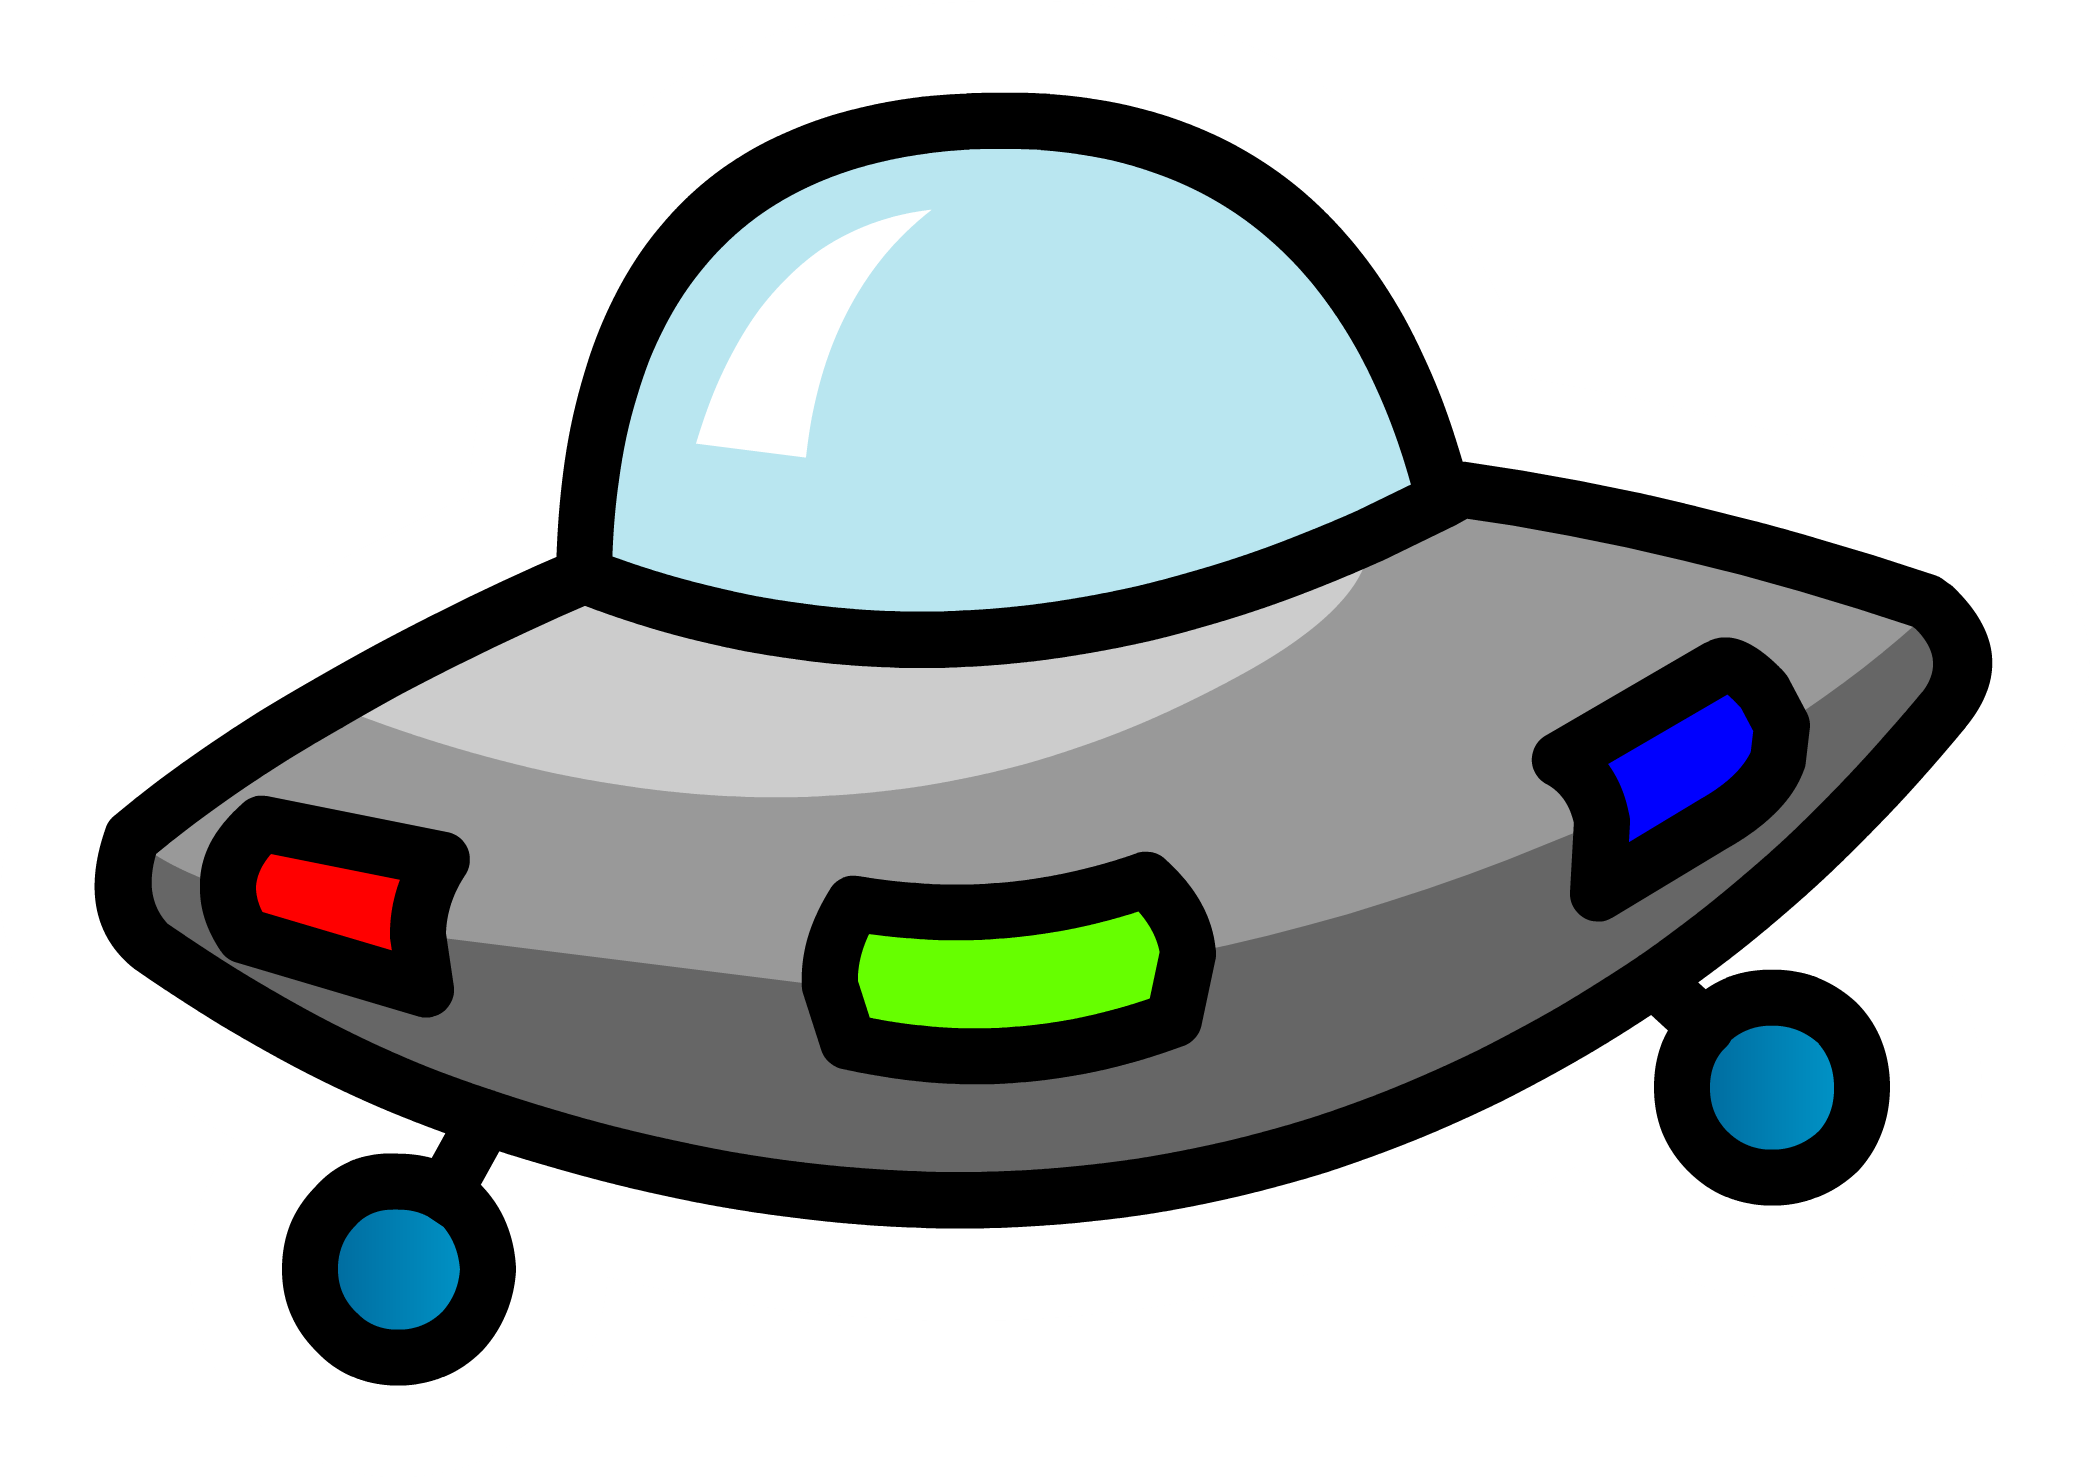 Image pin png club. Ufo clipart file